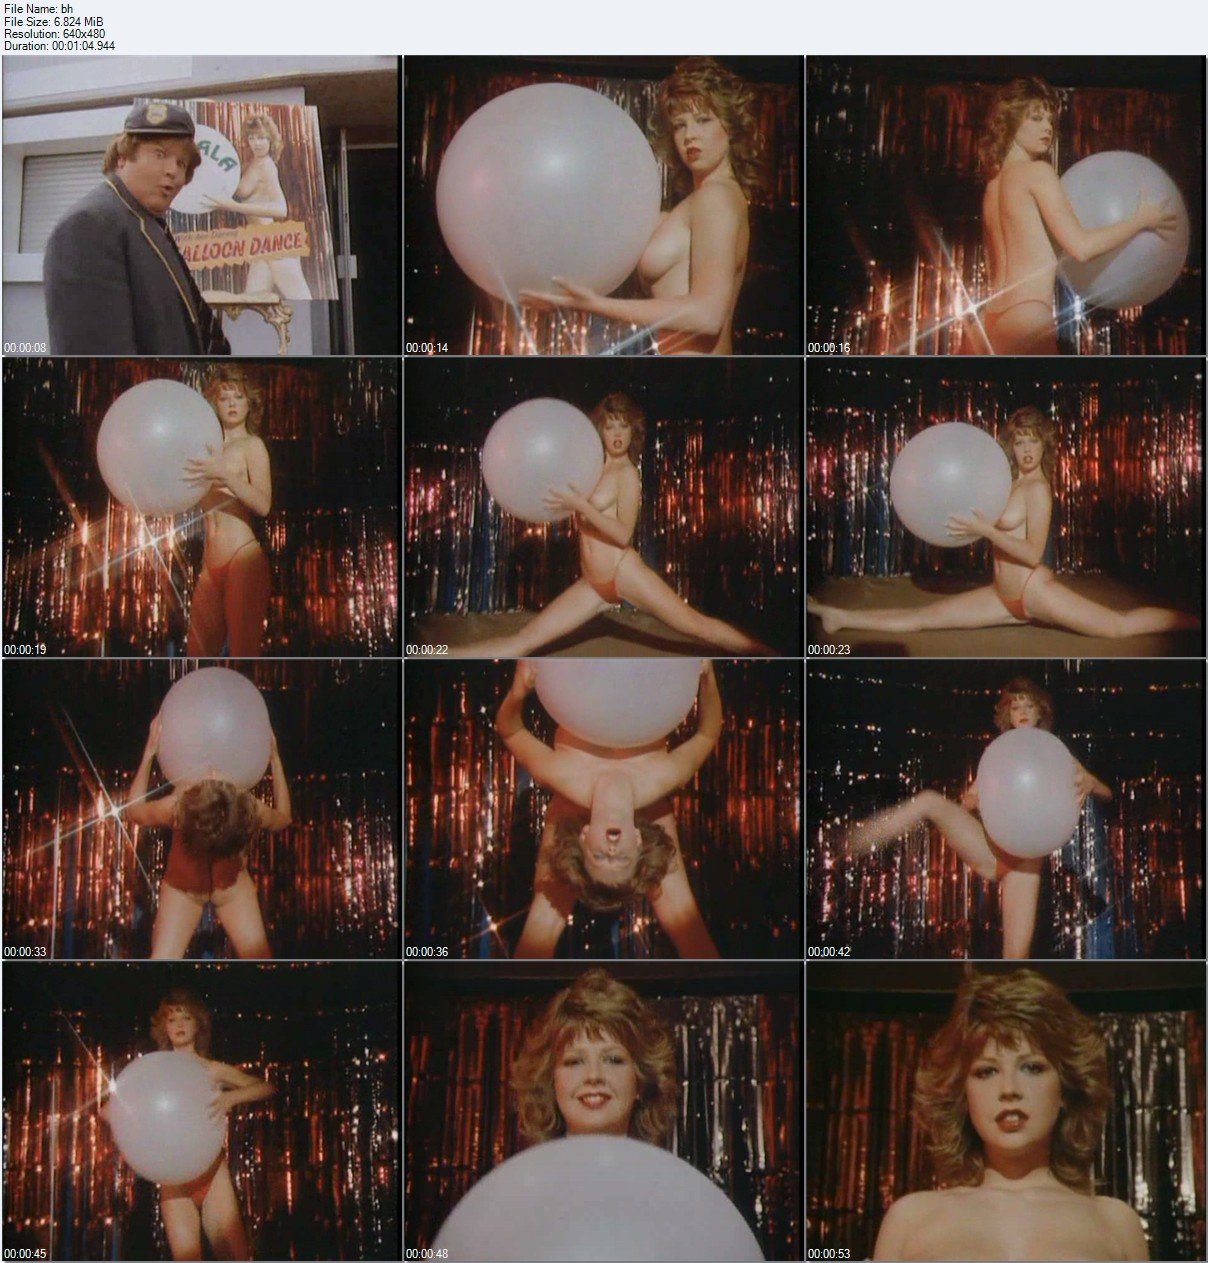 The Benny Hill Show nude pics.